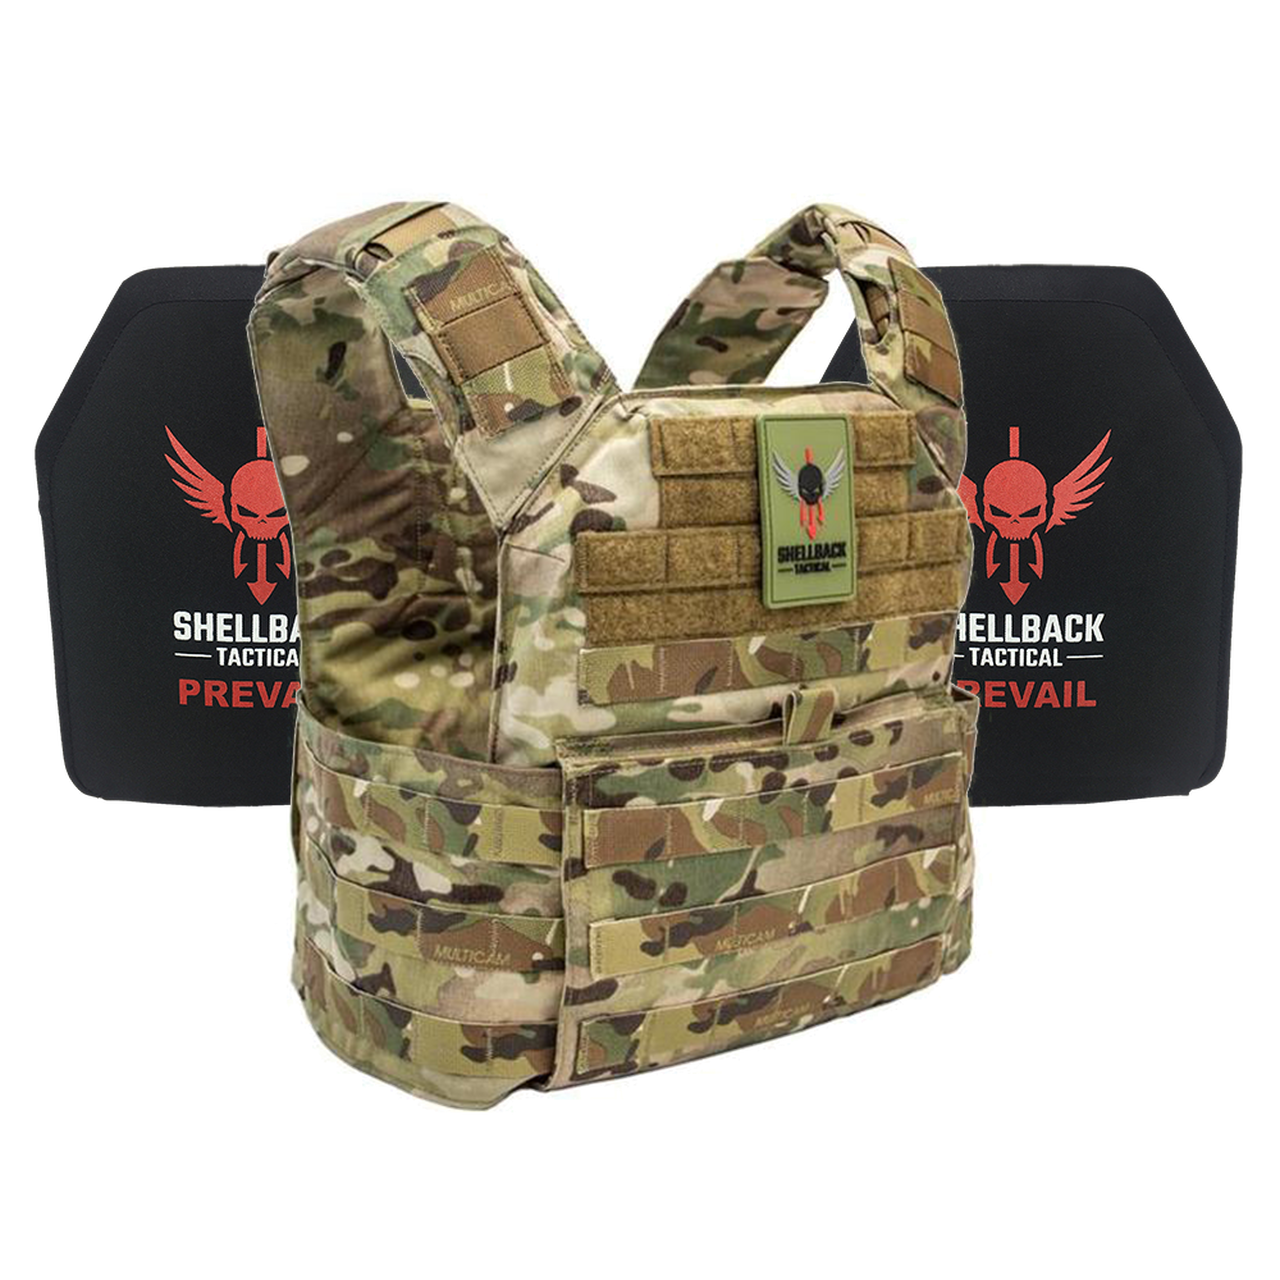 A Shellback Tactical Banshee Active Shooter Kit with Level III Single Curve 10 x 12 Hard Armor plate carrier with a Shellback Tactical Banshee Active Shooter Kit with Level III Single Curve 10 x 12 Hard Armor plate.